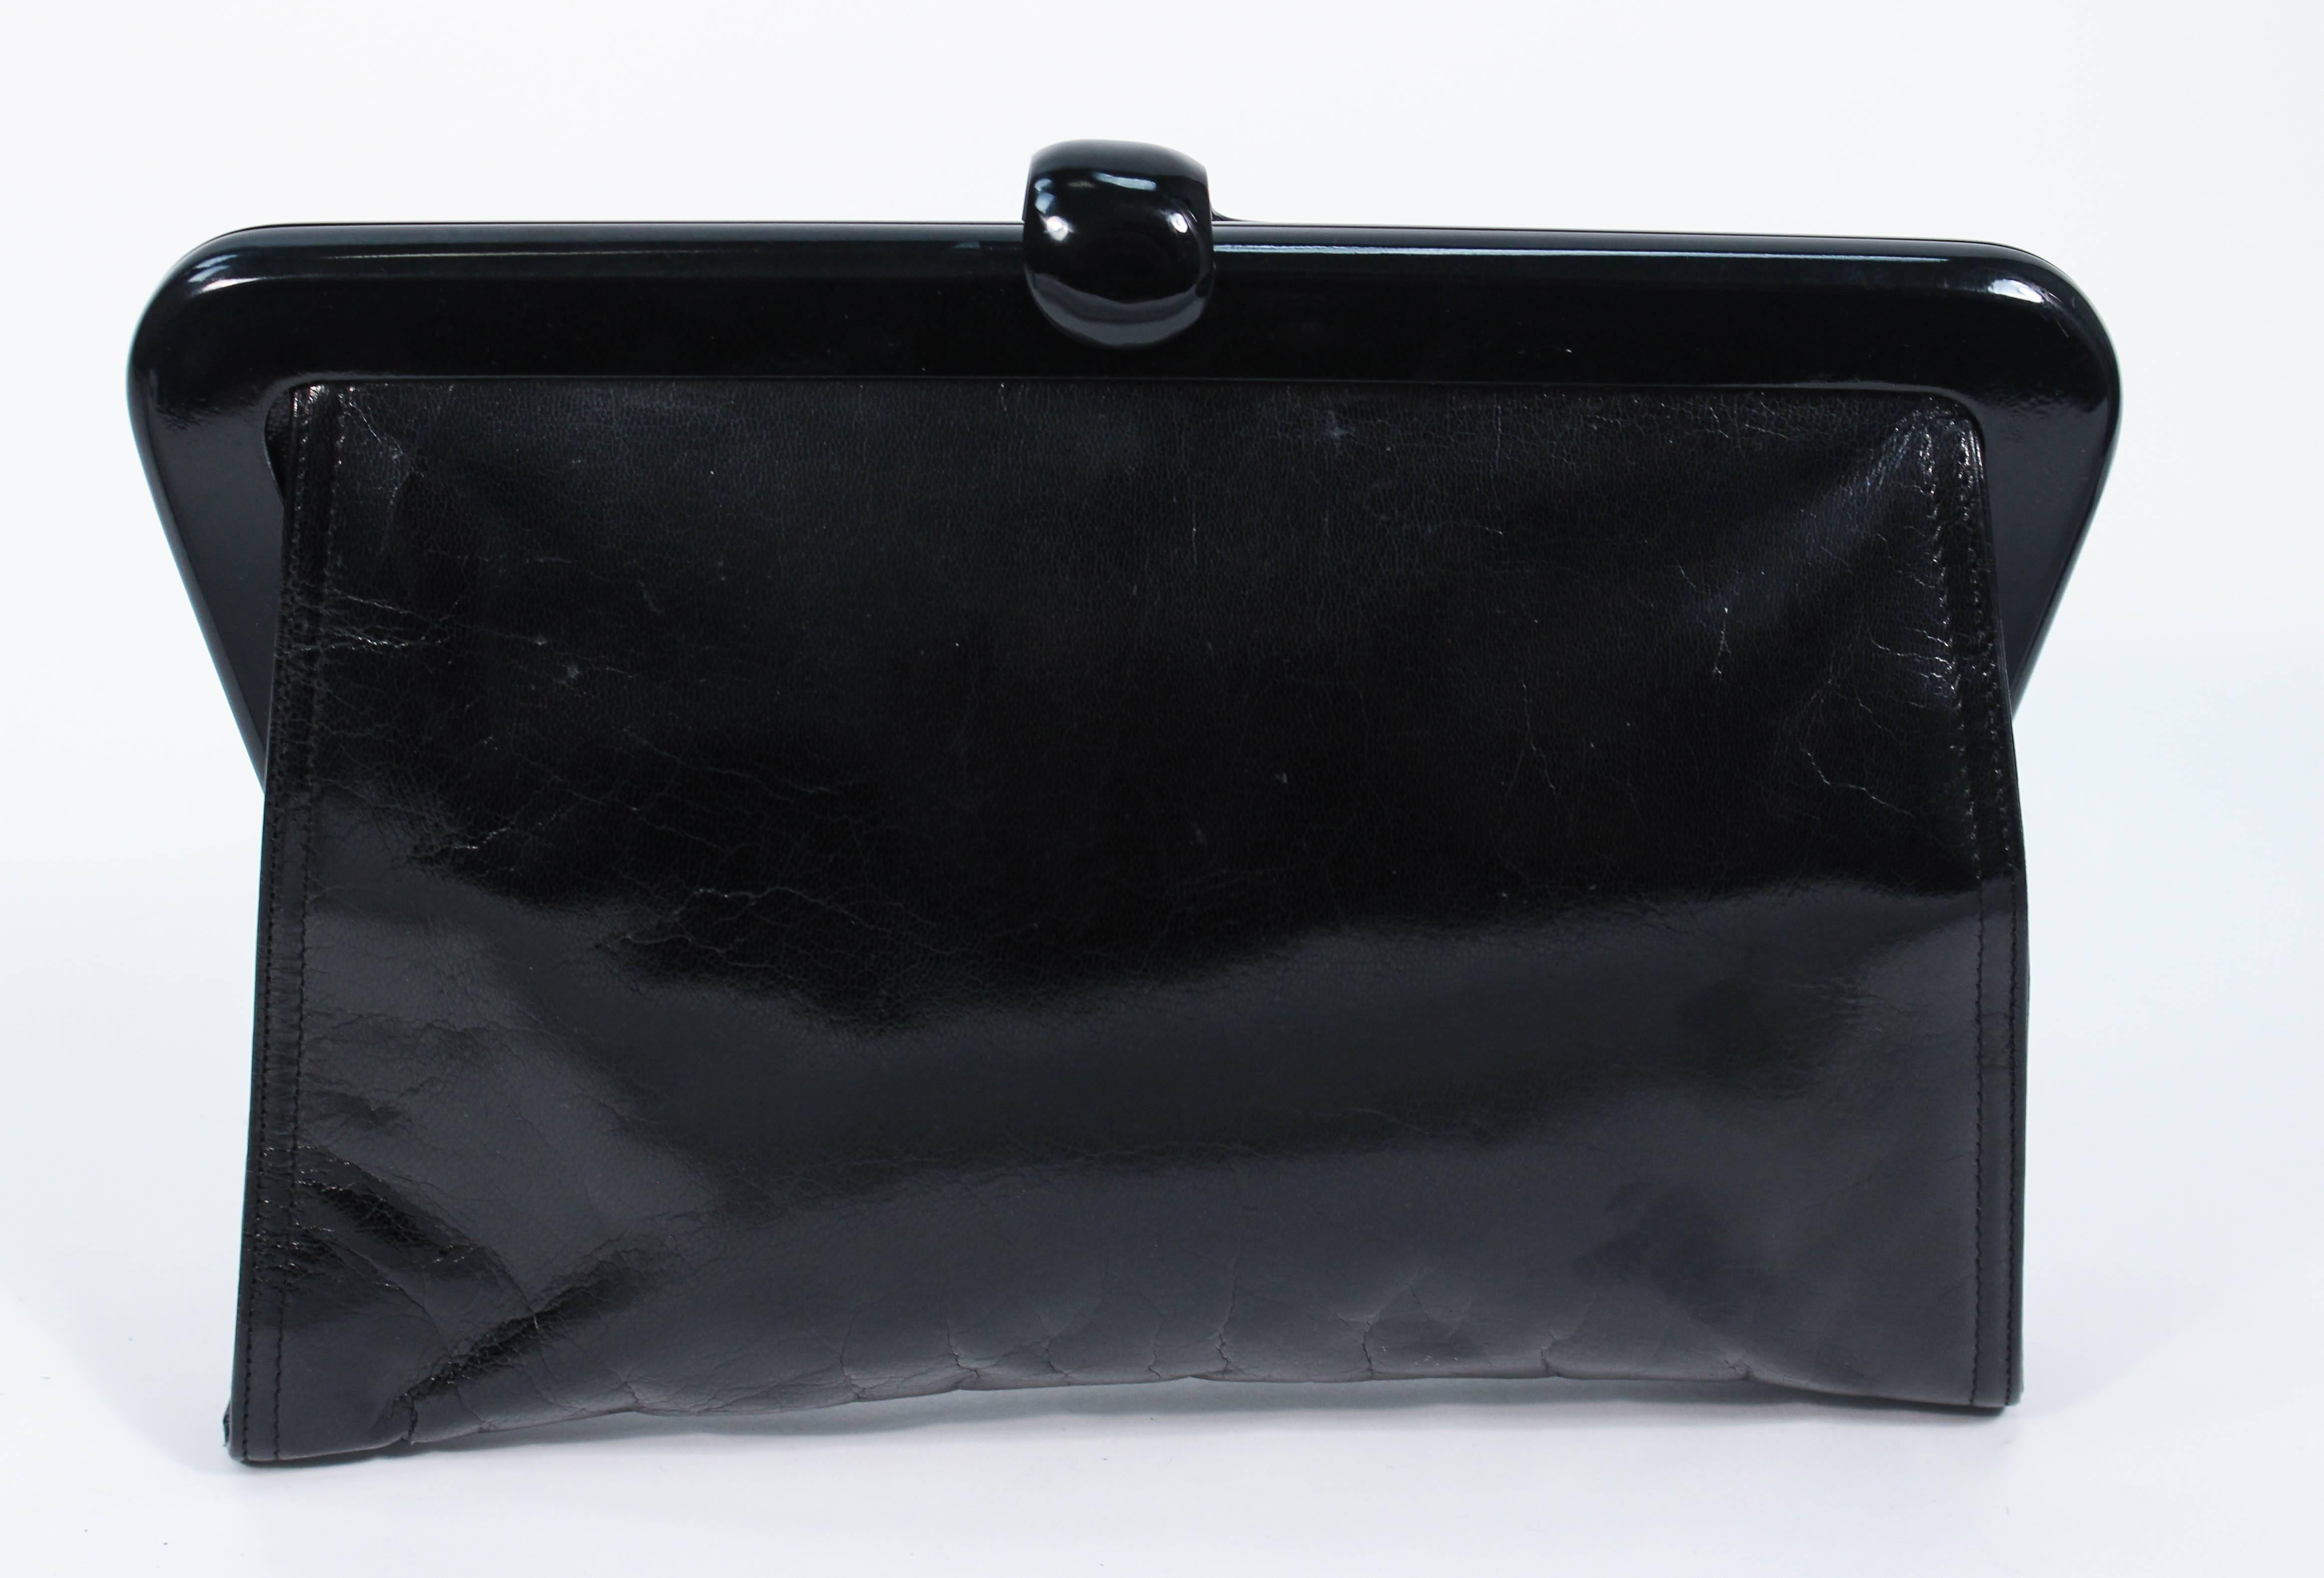 This Bottega Venta purse is composed of a polished black calfskin. Features a lever style clasp. There is an interior zipper compartment. Made in France. In excellent vintage condition, there is some marking on the back of the purse which maybe